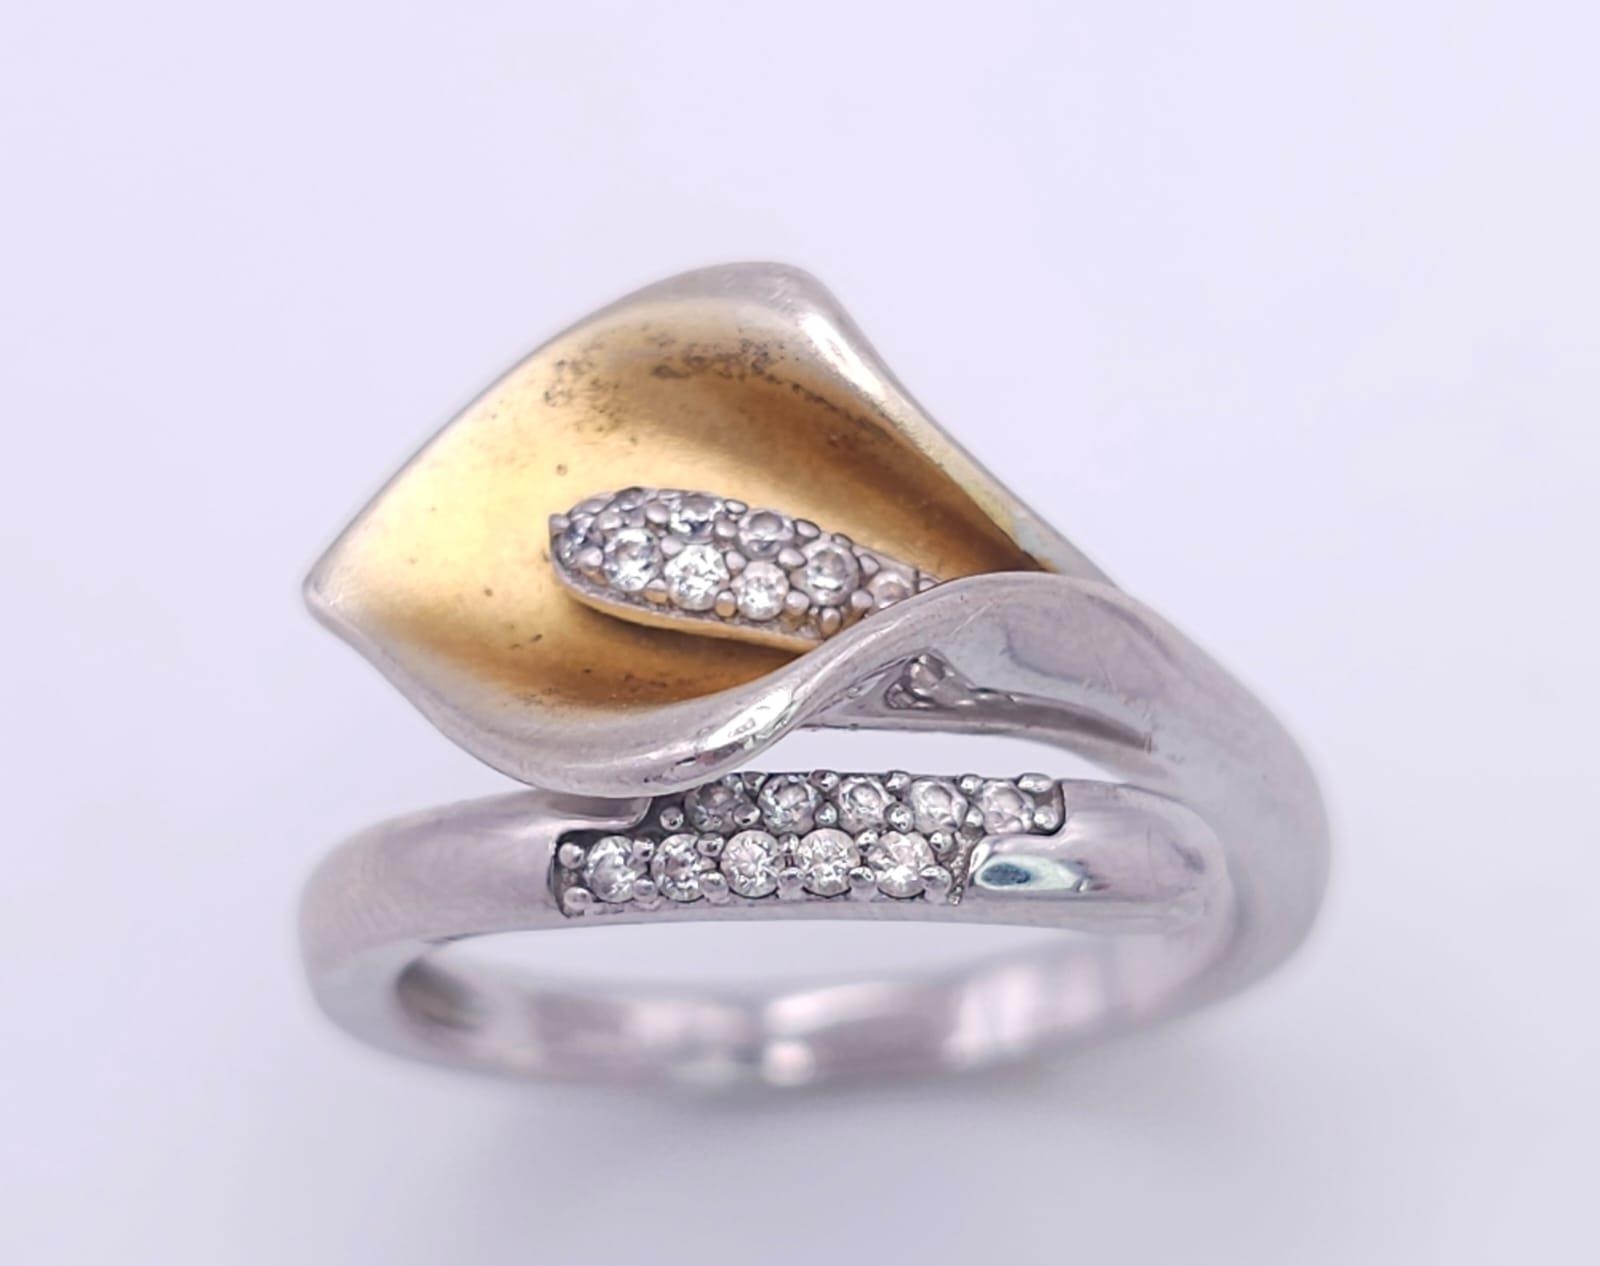 Three Different Style Fancy Sterling Silver Rings - 2 x P, 1 x N. 21.2g total weight. Ref: 016551. - Image 14 of 19